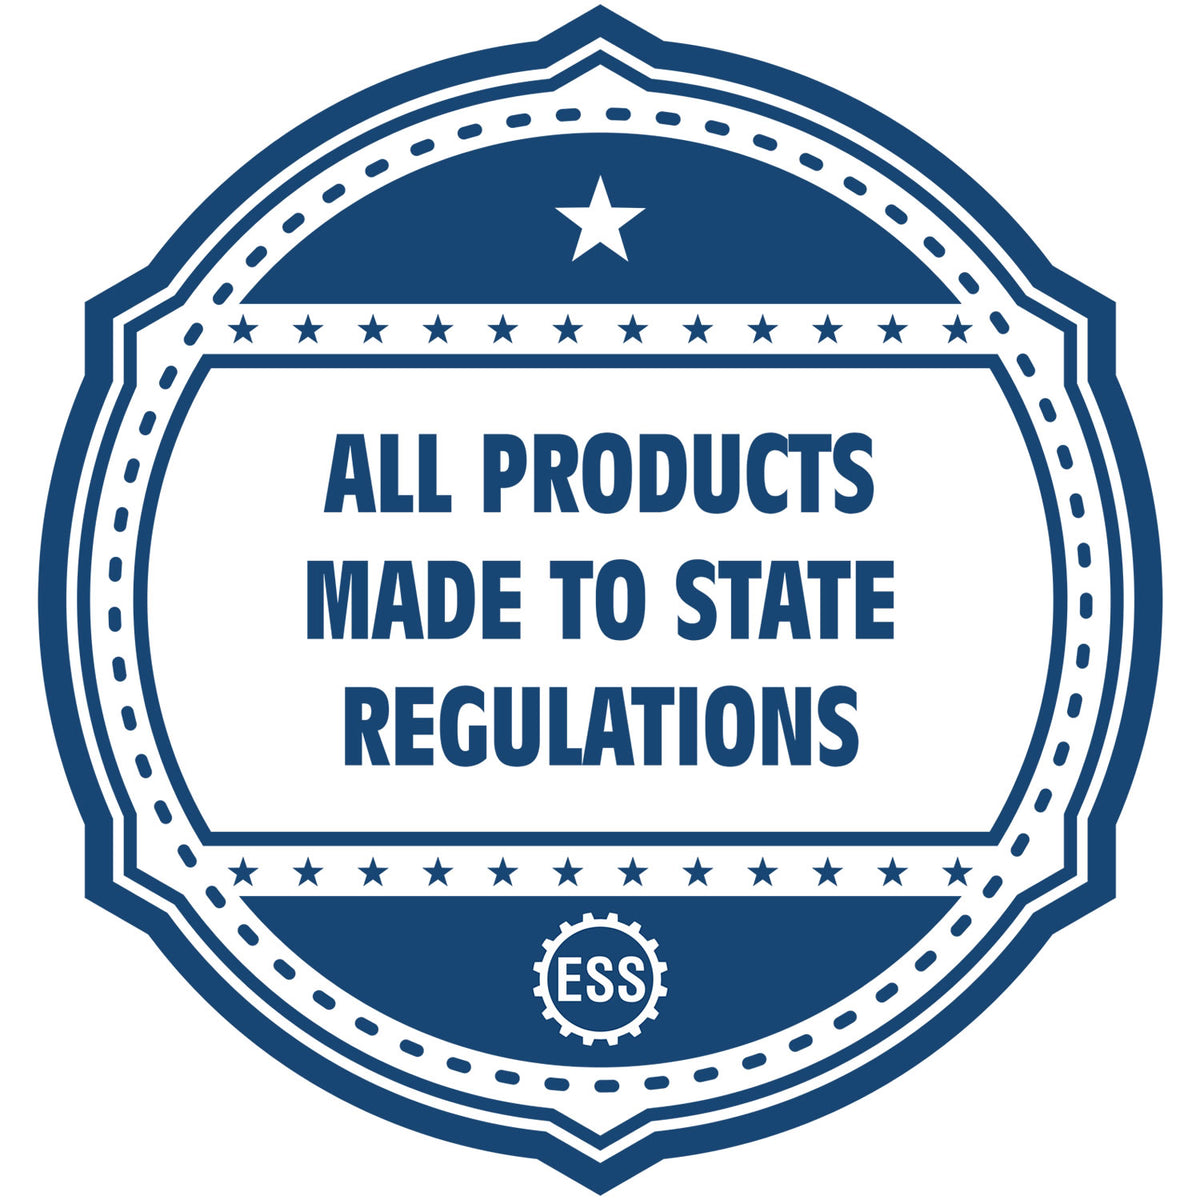 An icon or badge element for the Soft South Dakota Professional Engineer Seal showing that this product is made in compliance with state regulations.